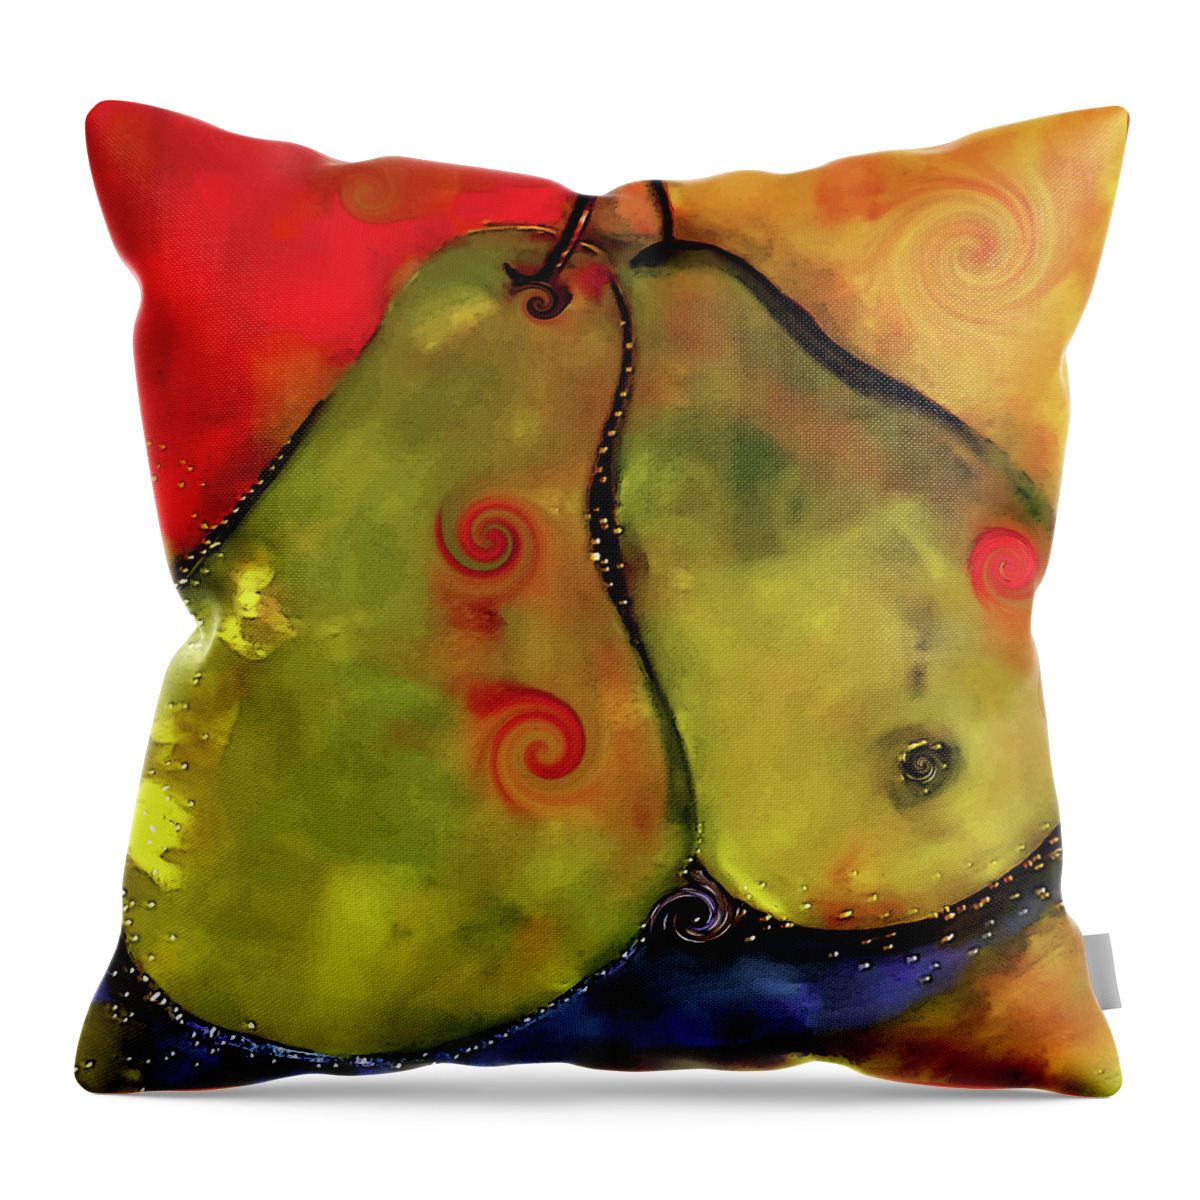 Pears Throw Pillow featuring the digital art Two Twirly Pears Painting by Lisa Kaiser